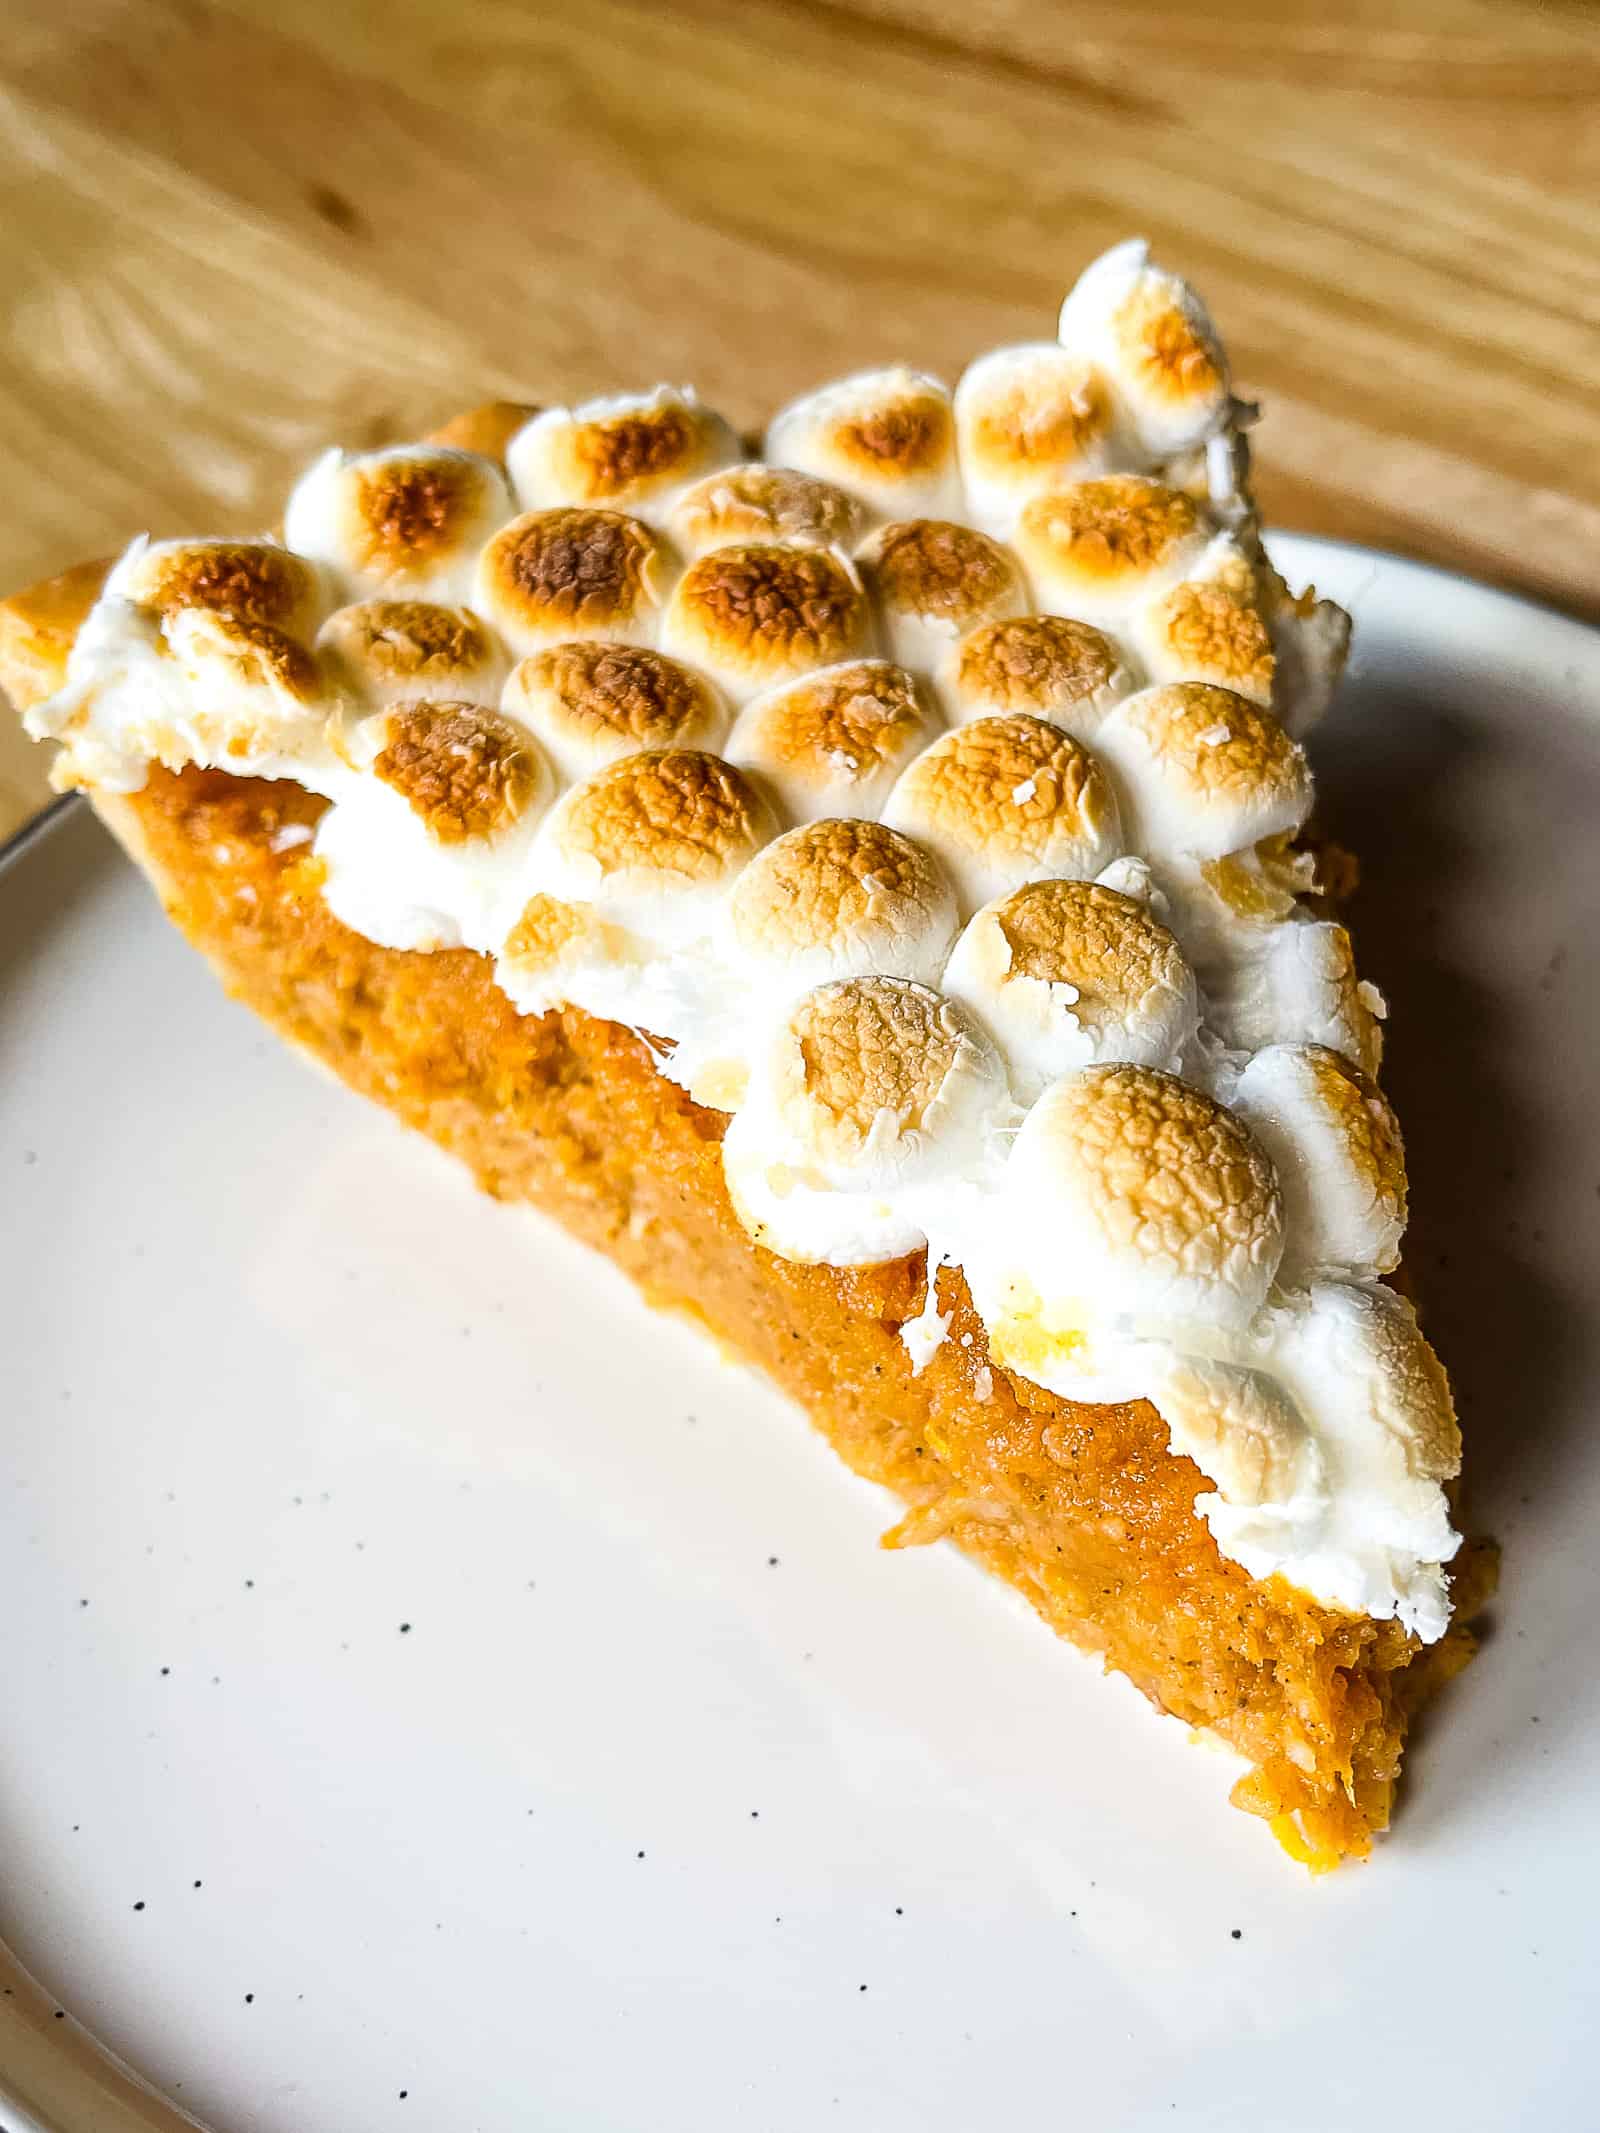 Slice of sweet potato casserole pie on a plate. The filling is bright orange and is topped with browned mini marshmallows.